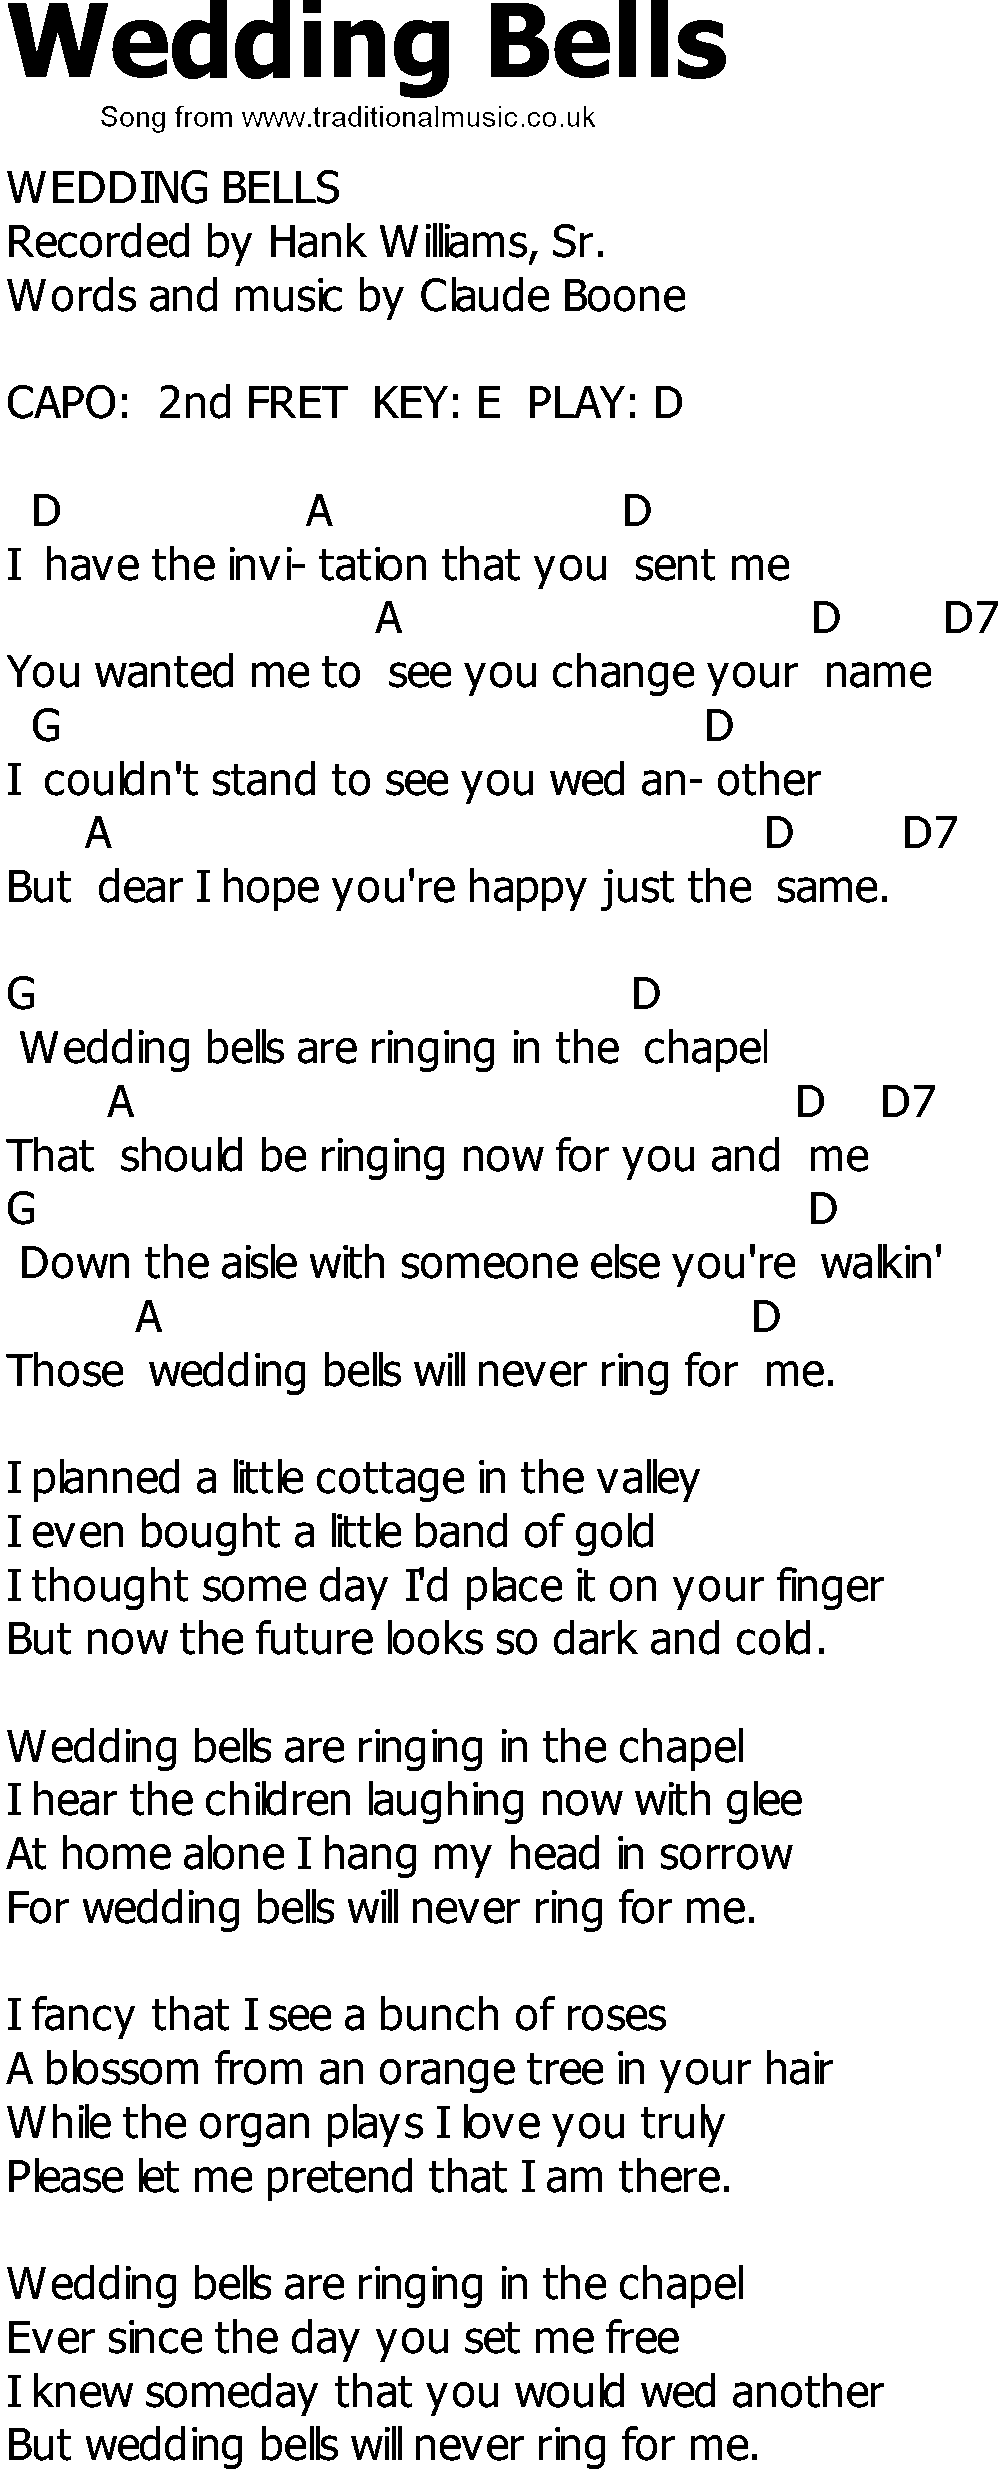 Old Country song lyrics with chords - Wedding Bells